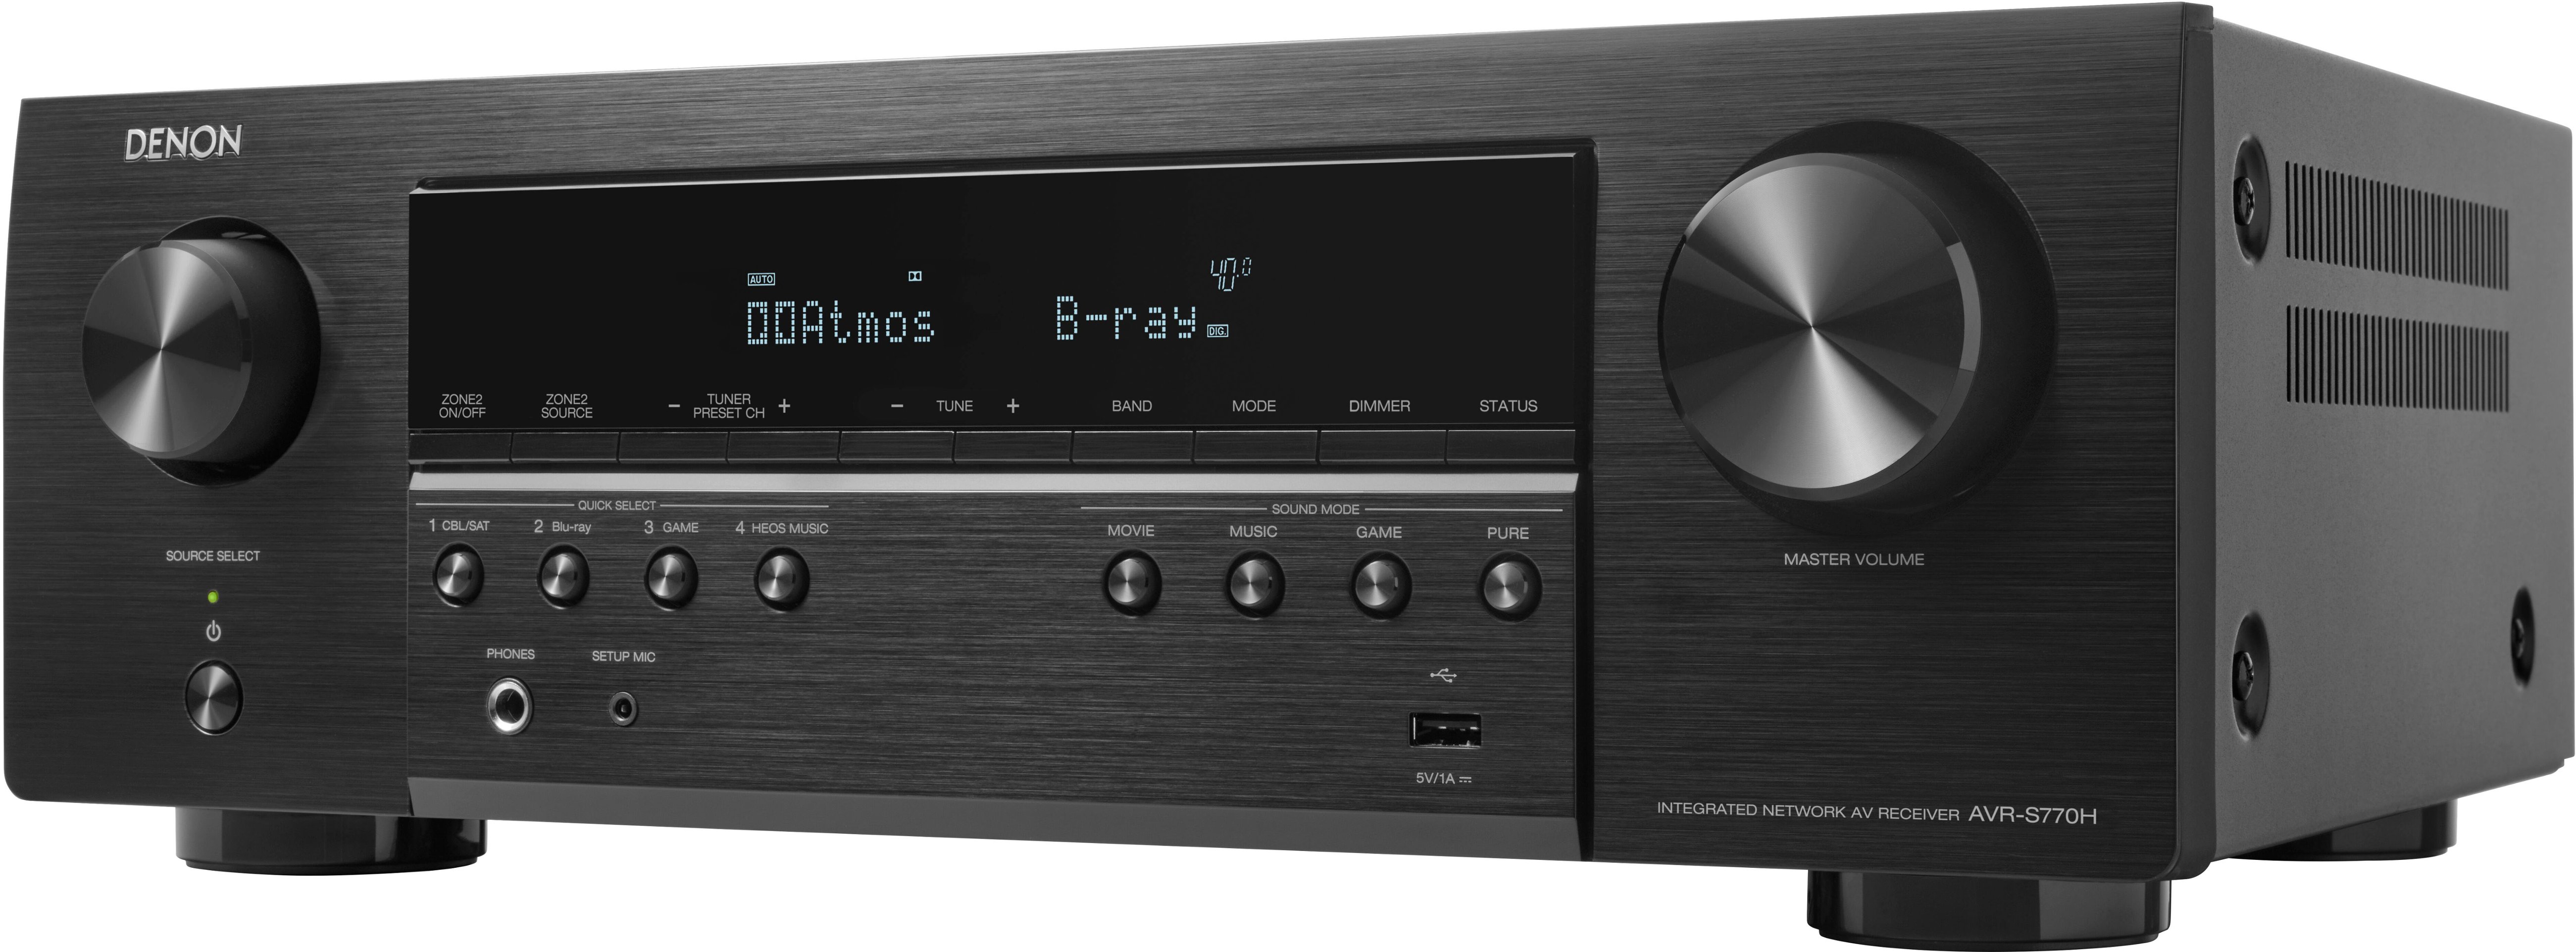 7) HDR Black with HEOS AVR-S770H Atmos HD (75W and Best with - Denon Dolby AVRS770H Theater Compatible Ultra 7.2-Ch. AV Receiver Alexa Buy 8K Home X